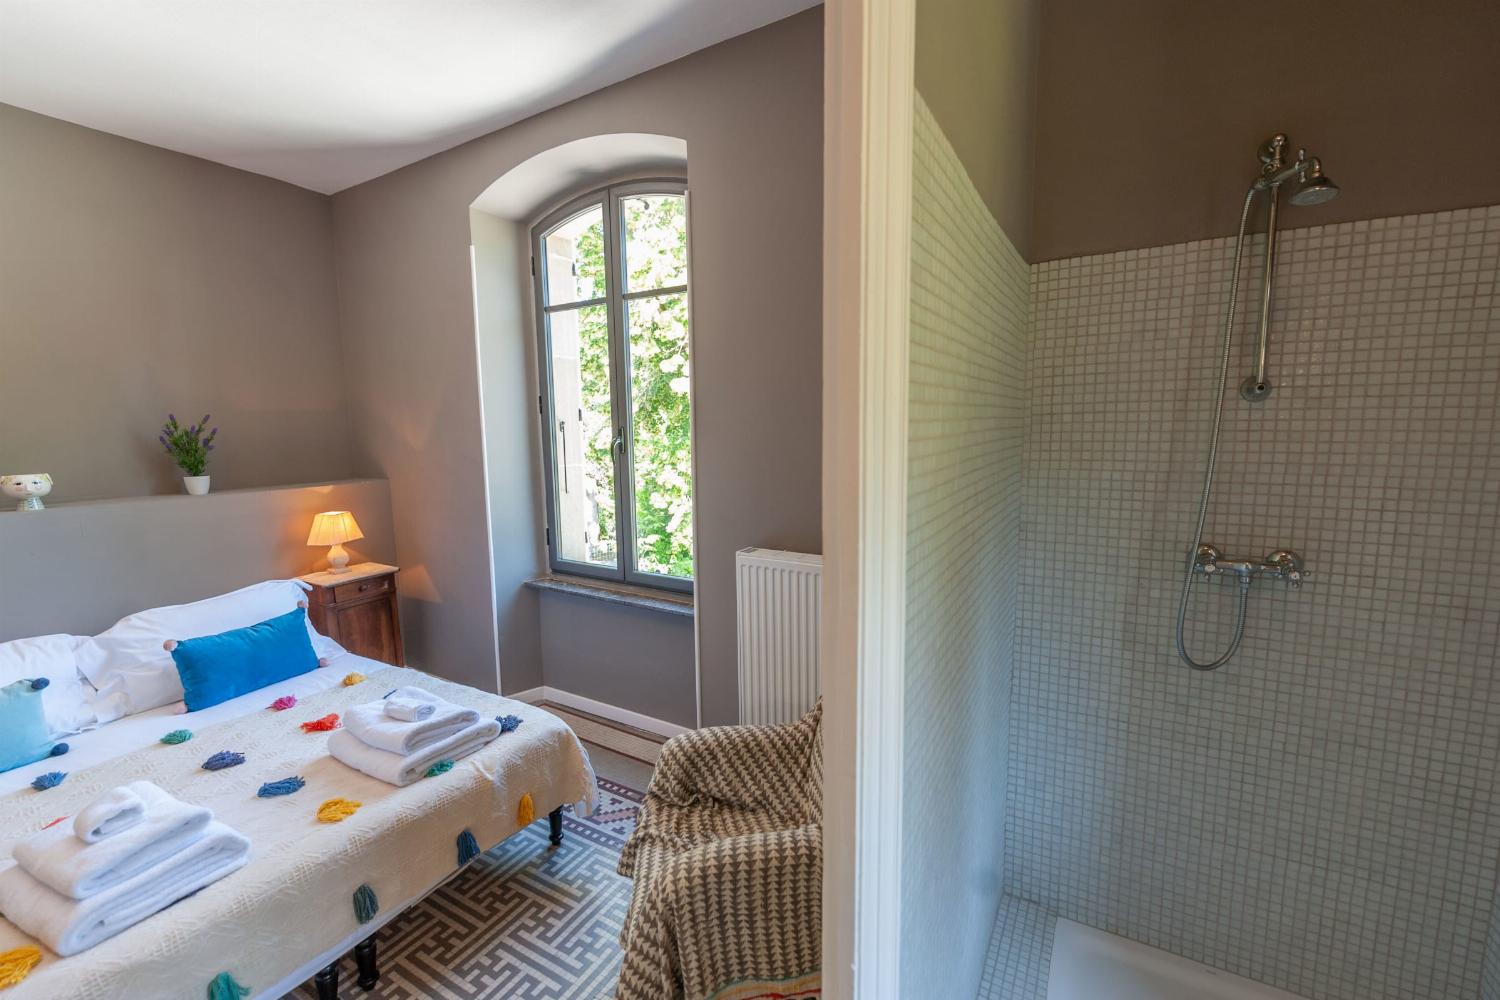 Bedroom | Rental home in South of France